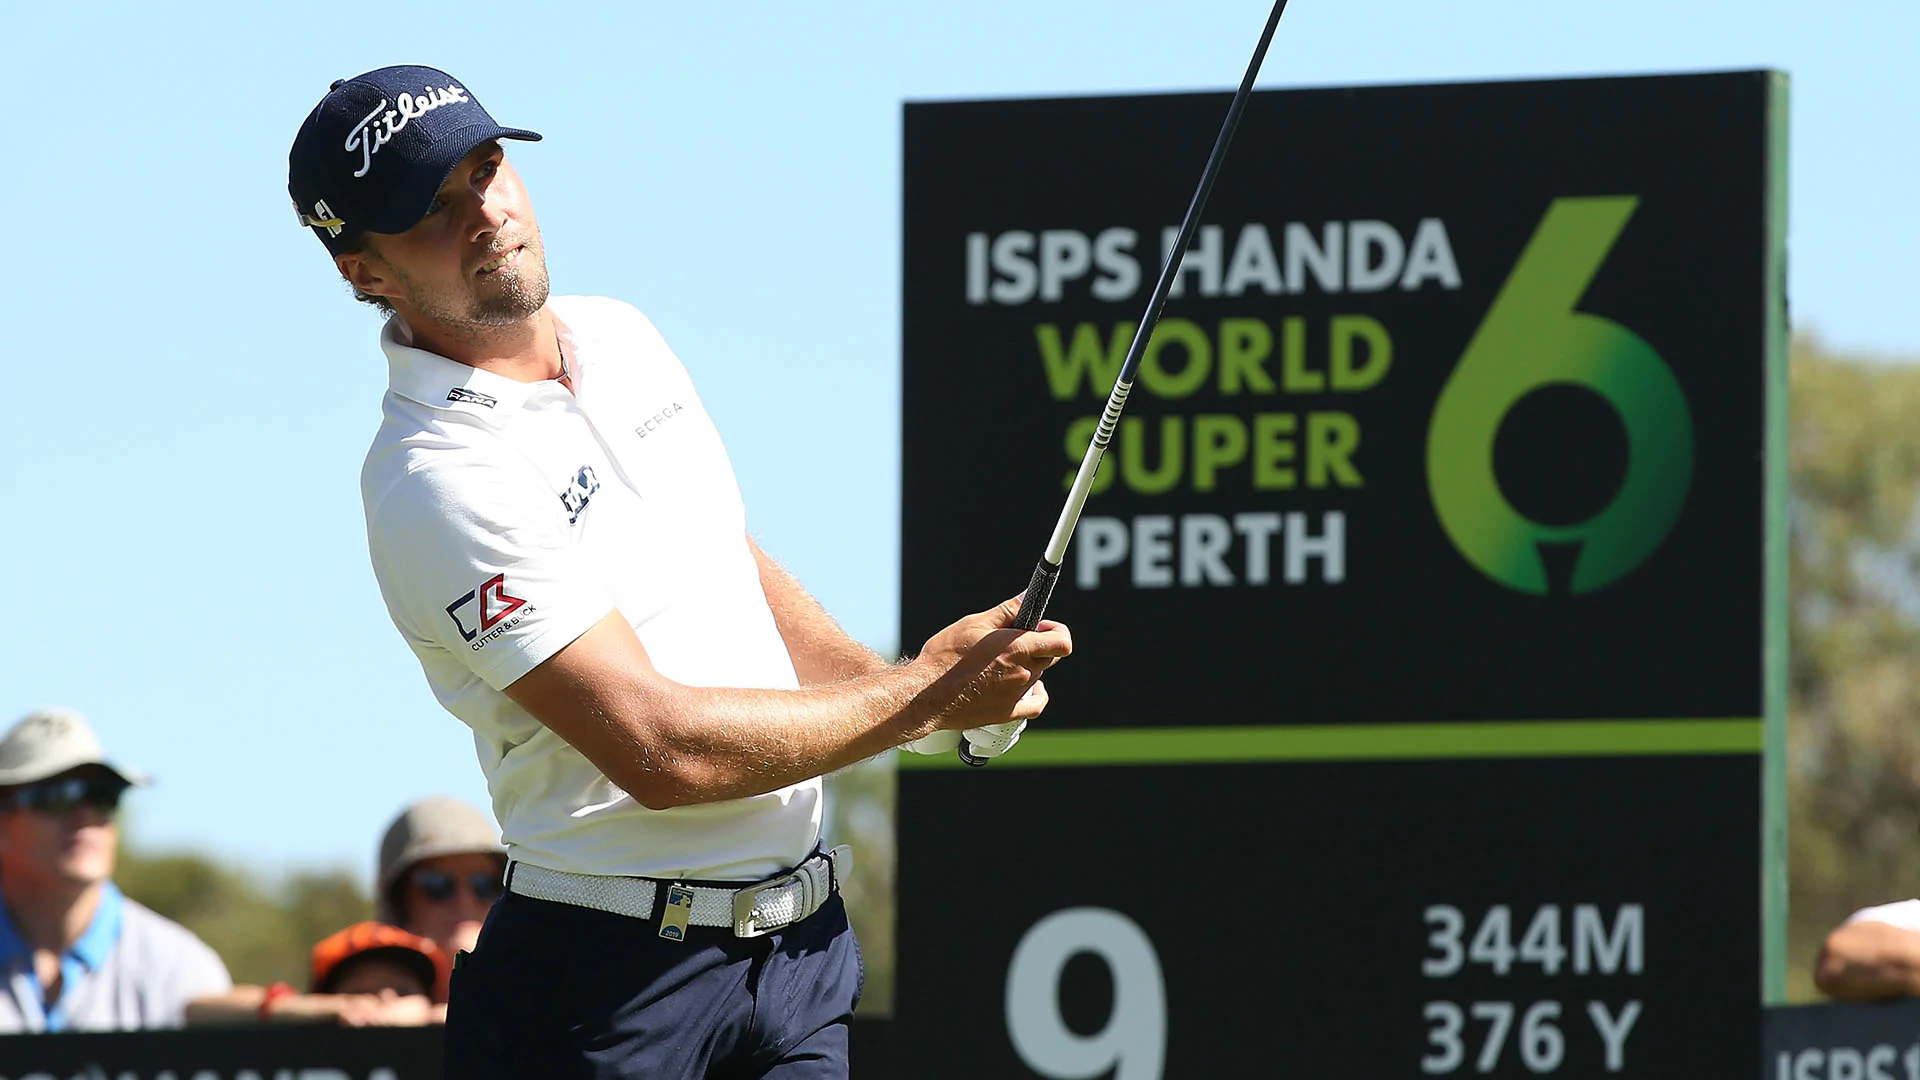 Langfors tops match-play seeds for World Super 6 Perth